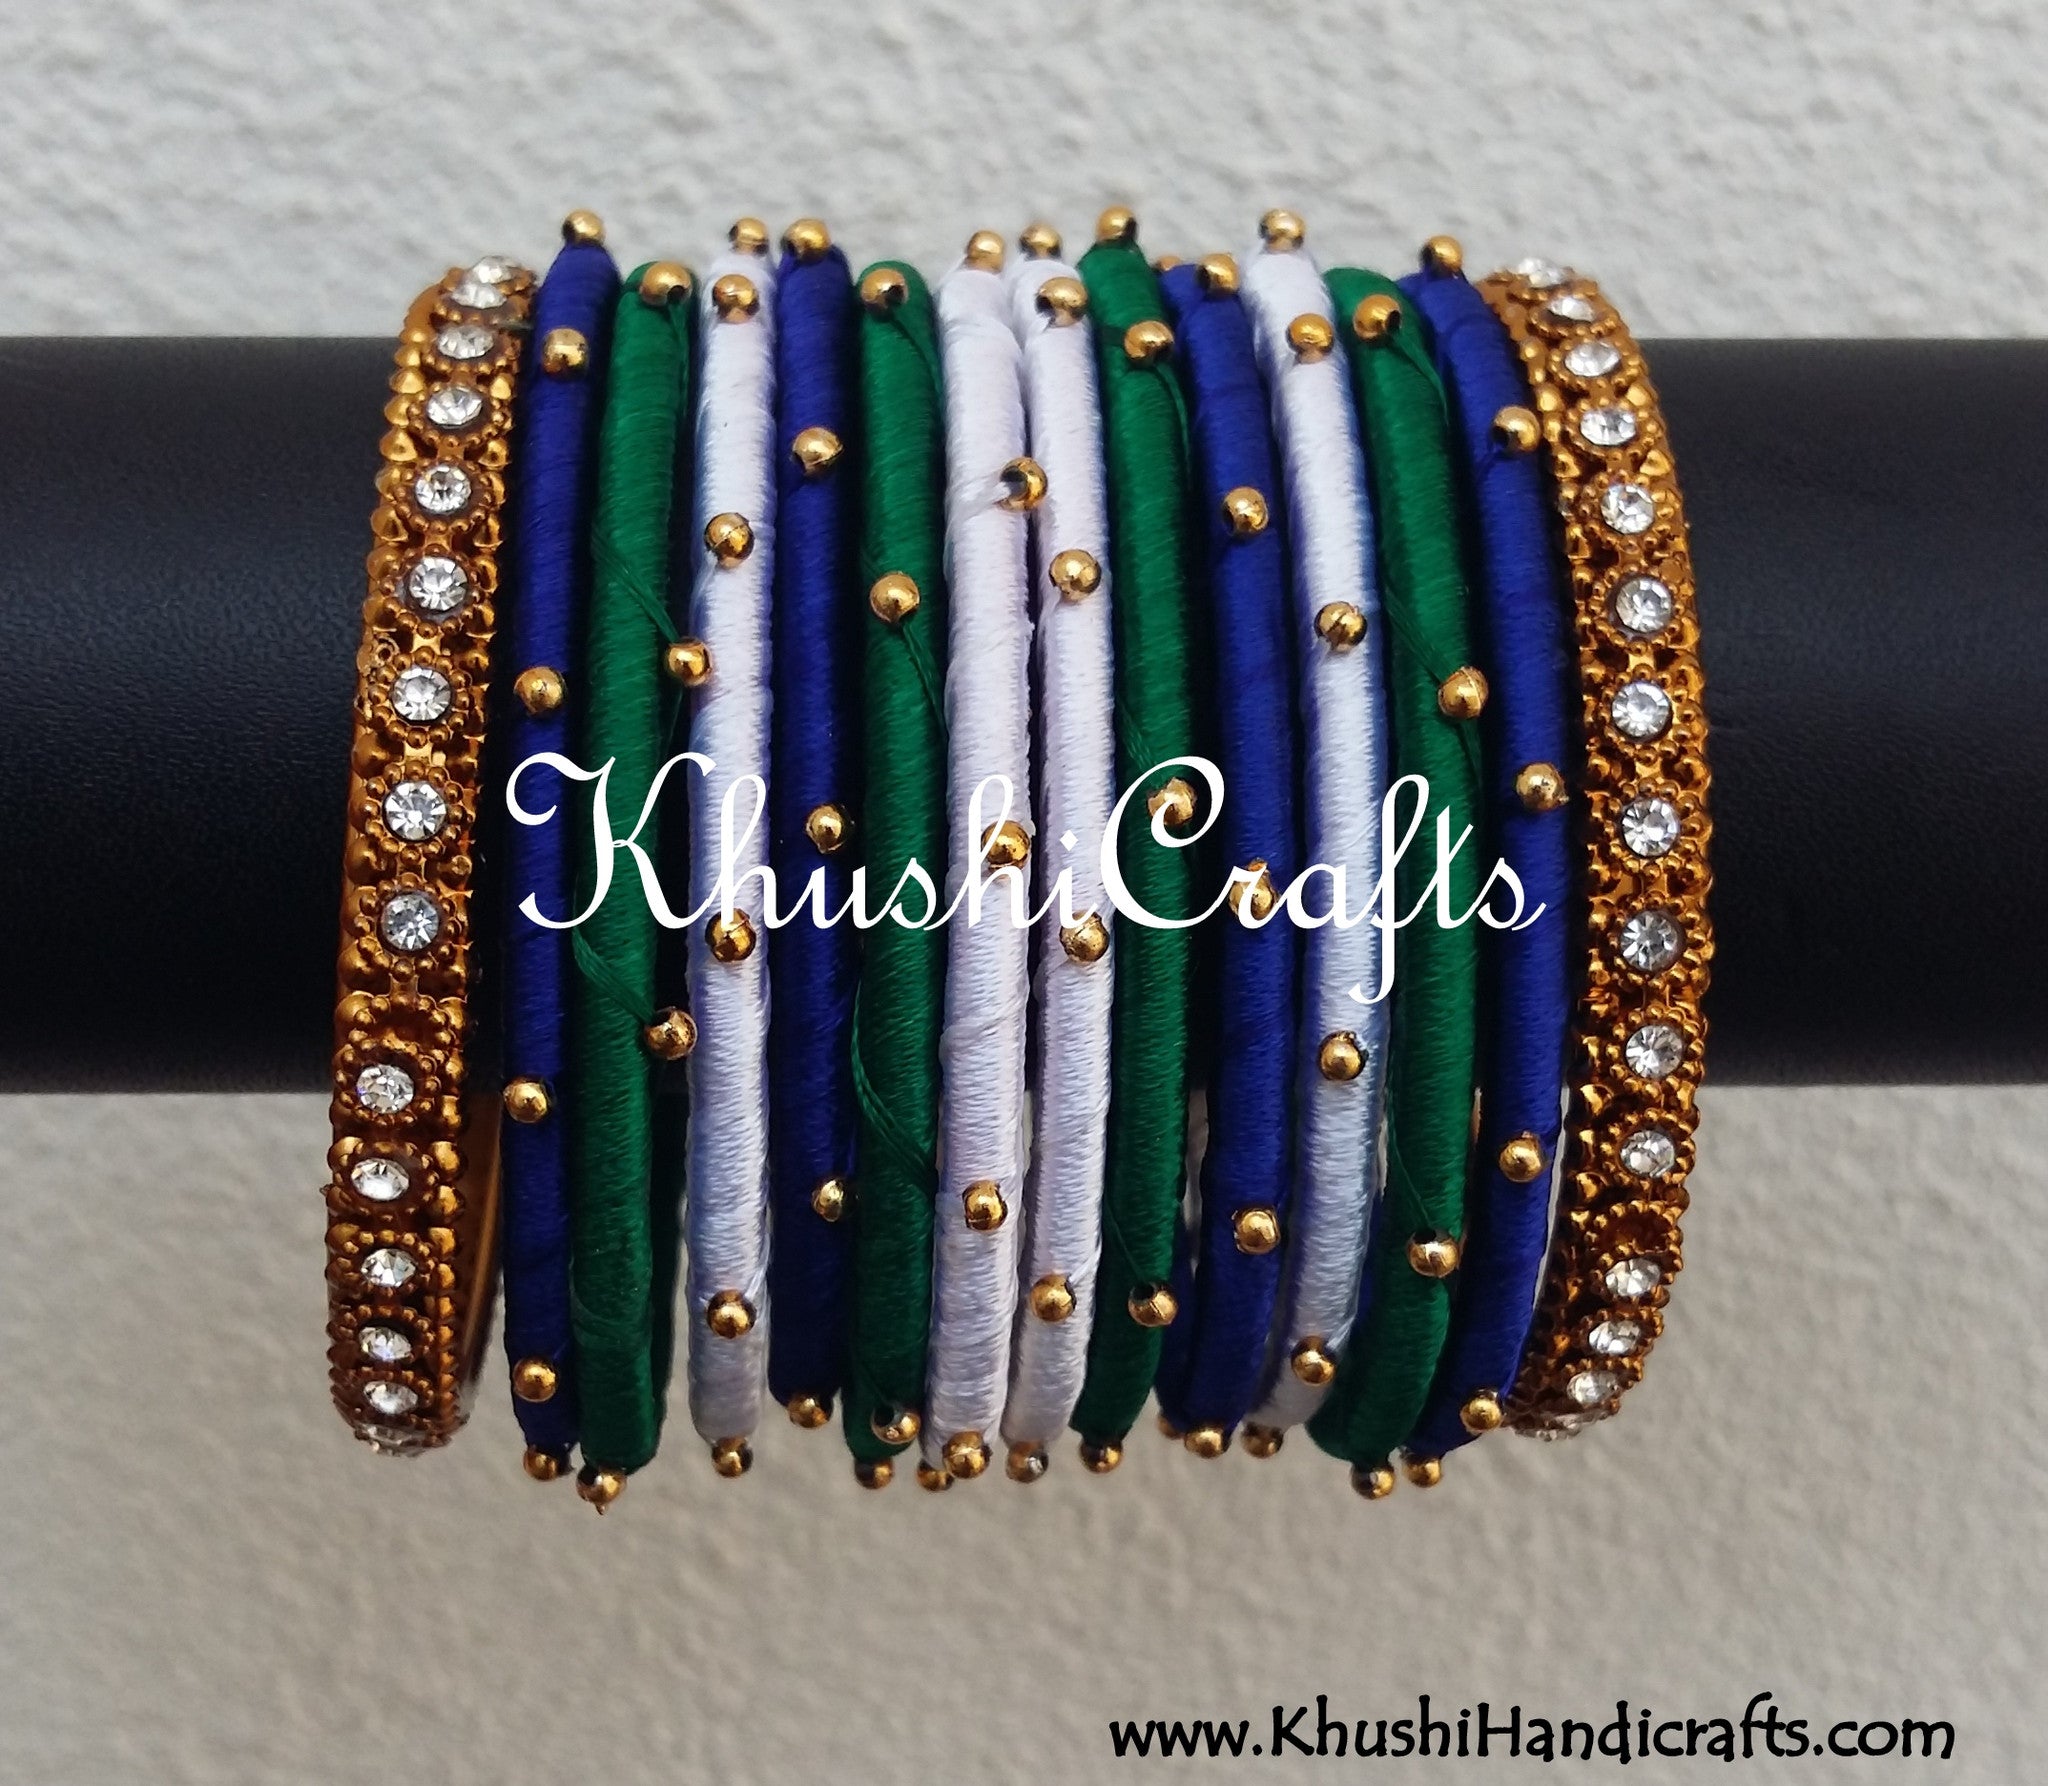 Hand-crafted exquisite Silk Bangles in Green,White and Blue - Khushi Handmade Jewellery